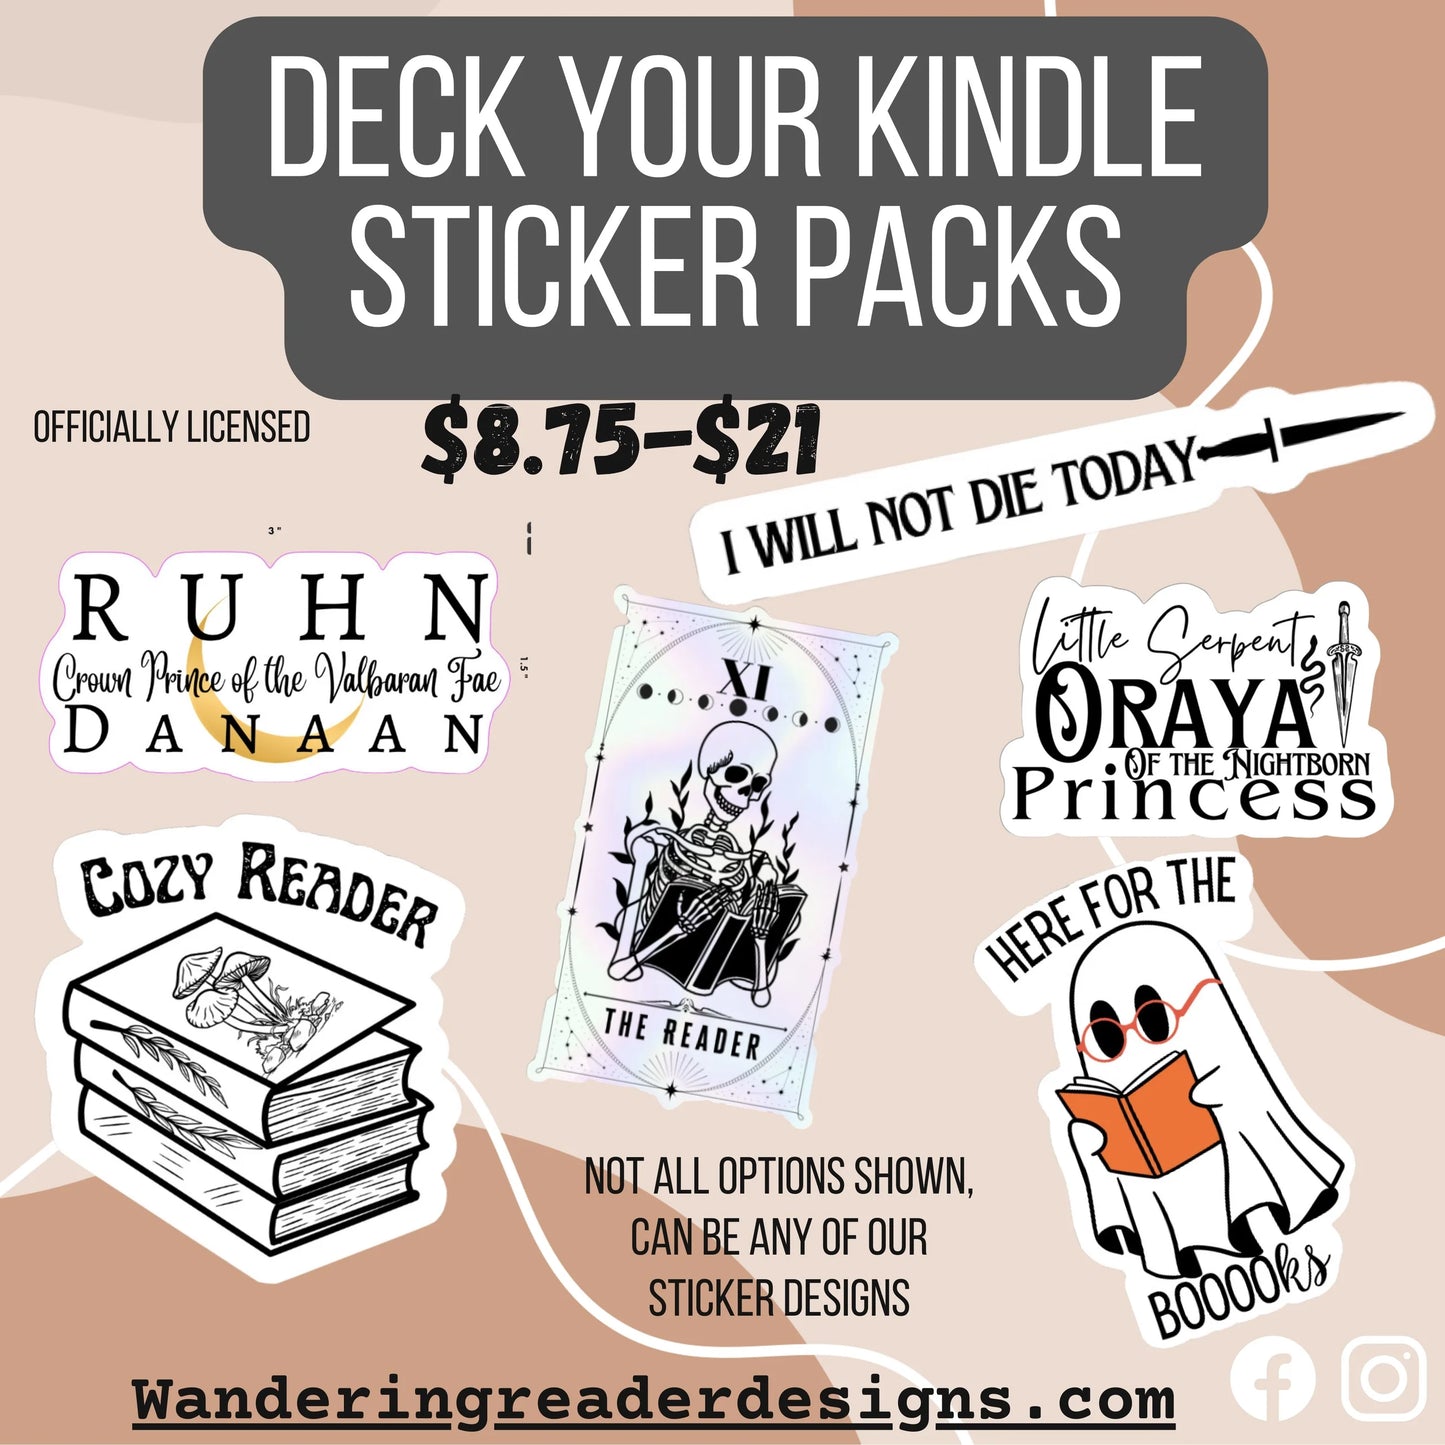 Deck Your Kindle - Mystery Sticker Packs! $8.75 - $21.00